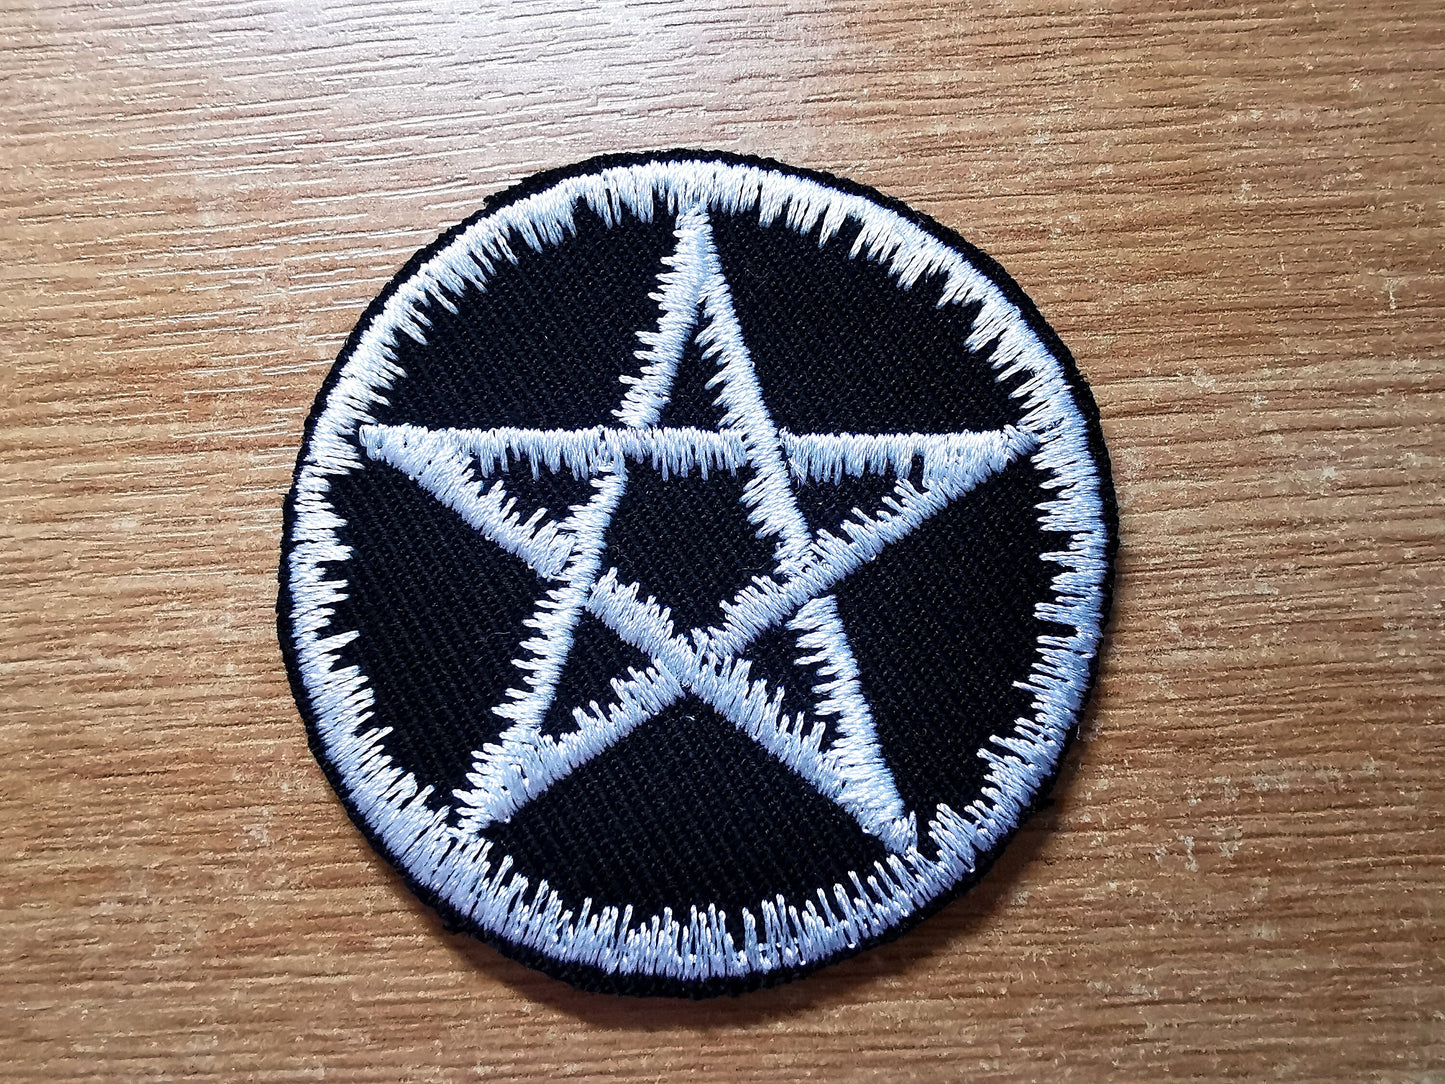 Pentagram Iron On Embroidered Patch